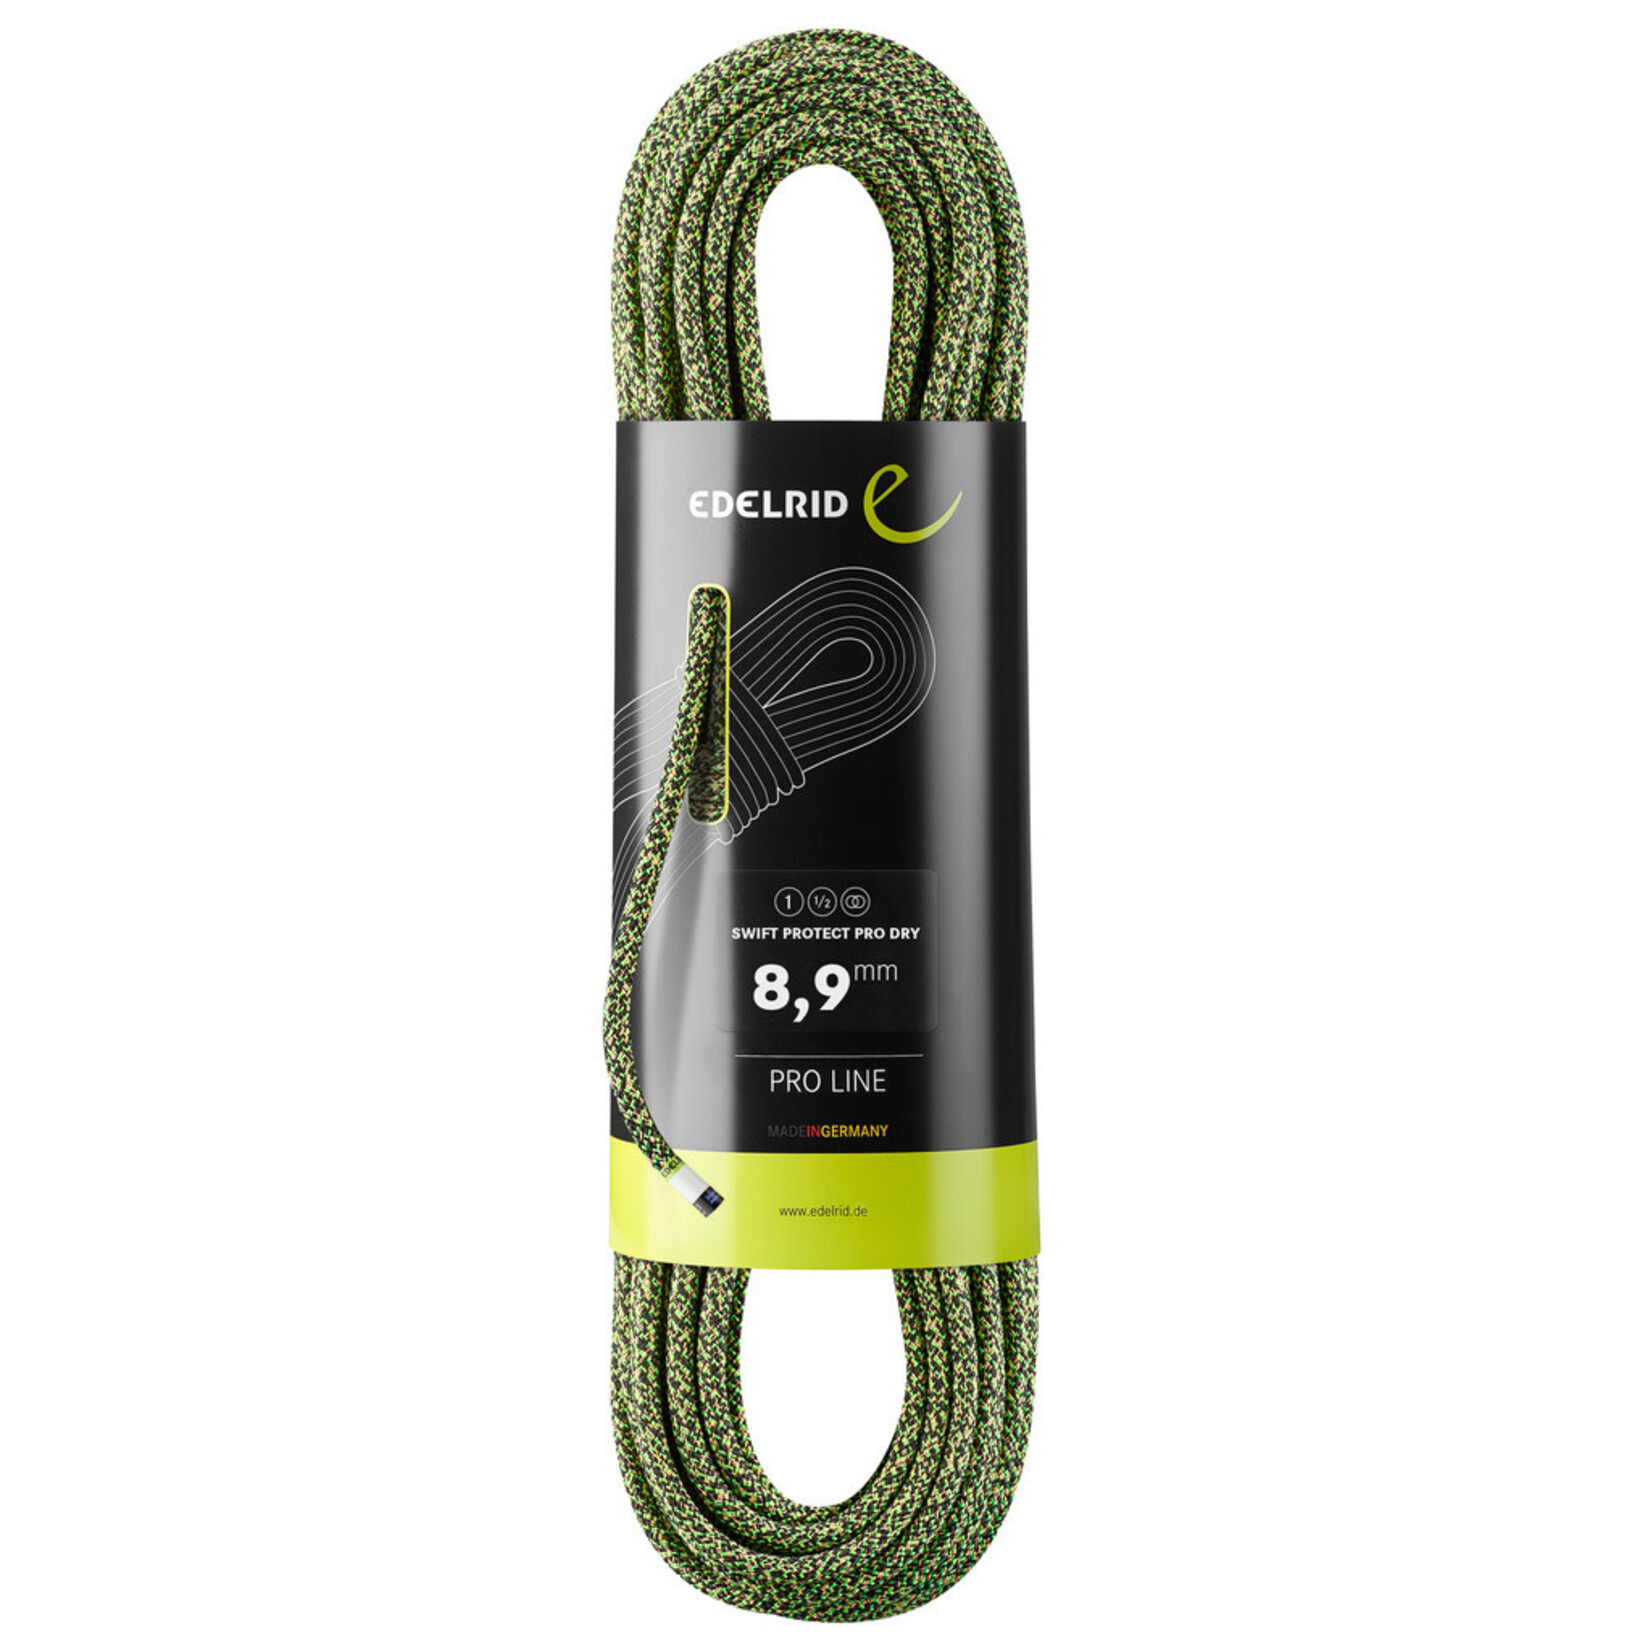 Edelrid Edelrid Swift Protect Pro Dry 8.9mm, 70m, night/green